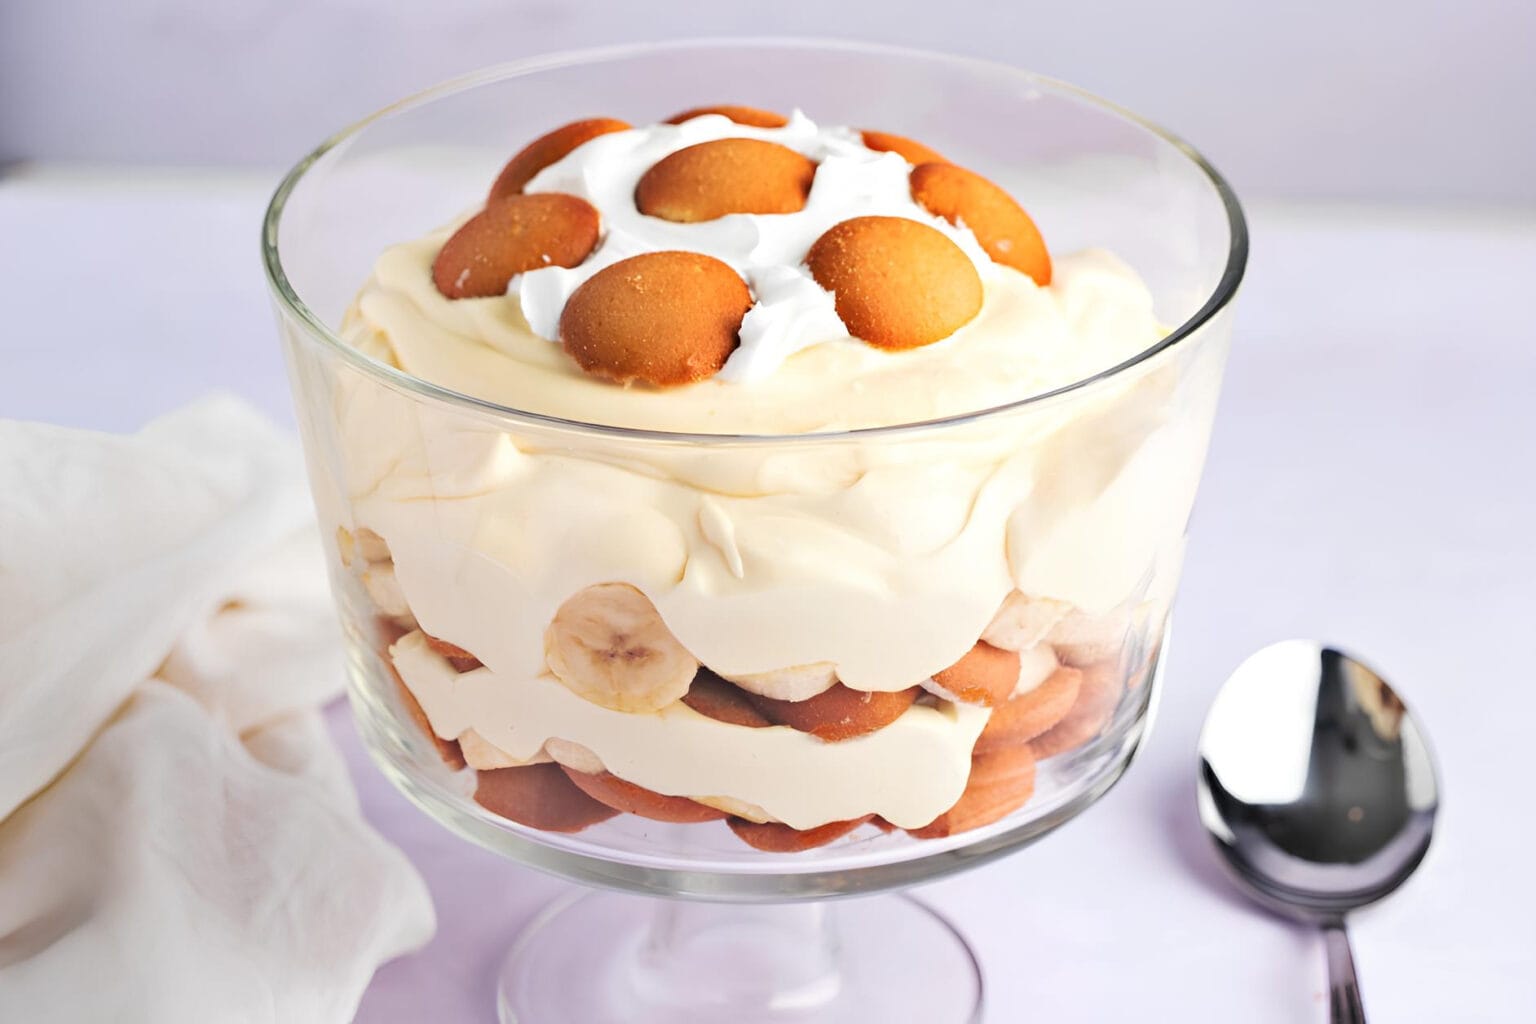 Quick and Easy Banana Pudding Recipe - Insanely Good